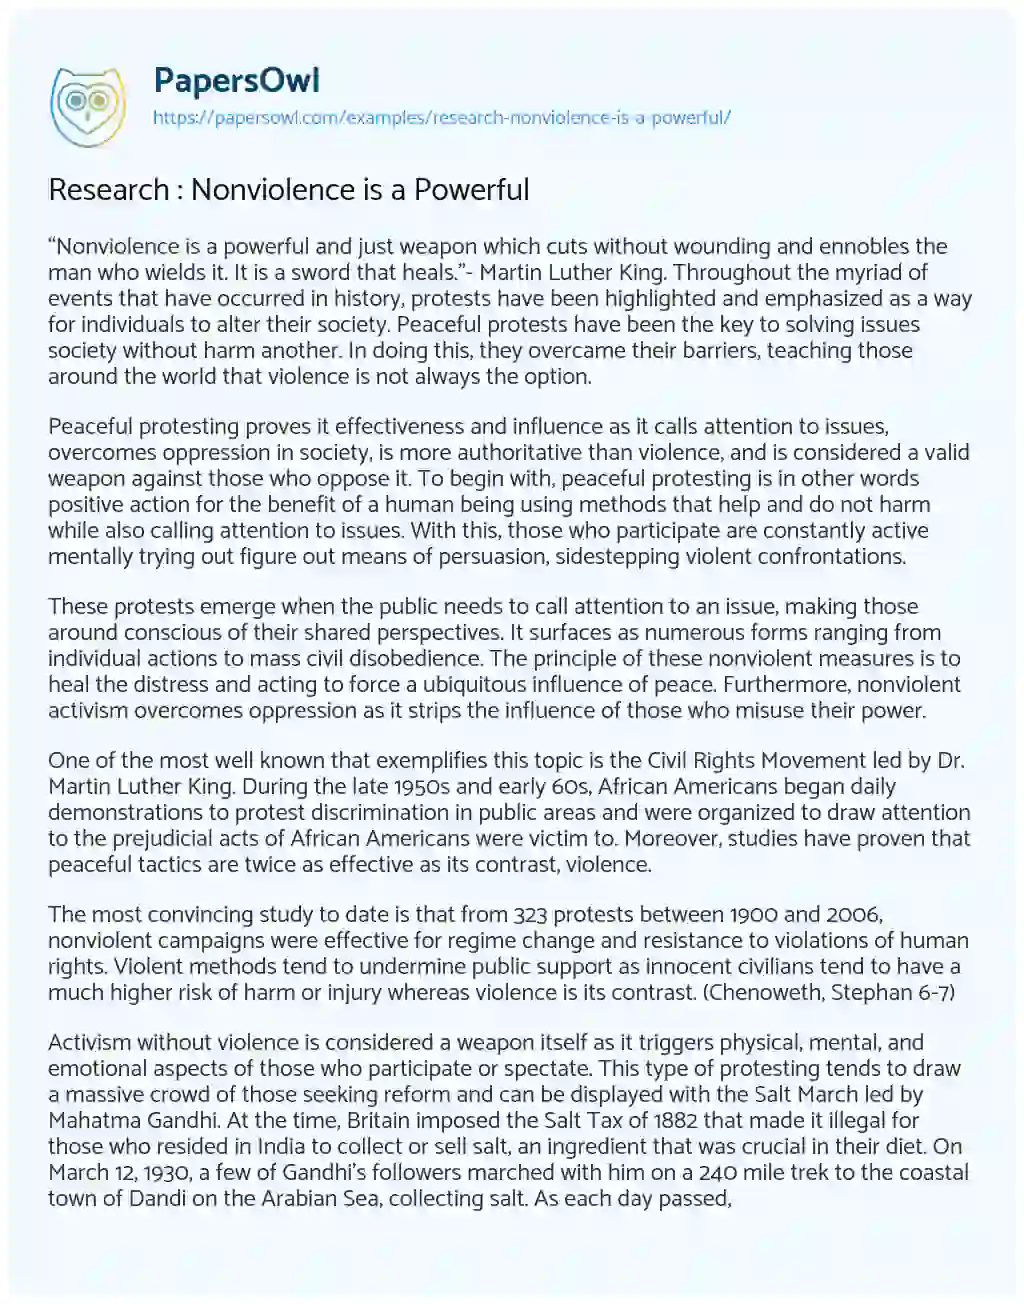 Essay on Research : Nonviolence is a Powerful